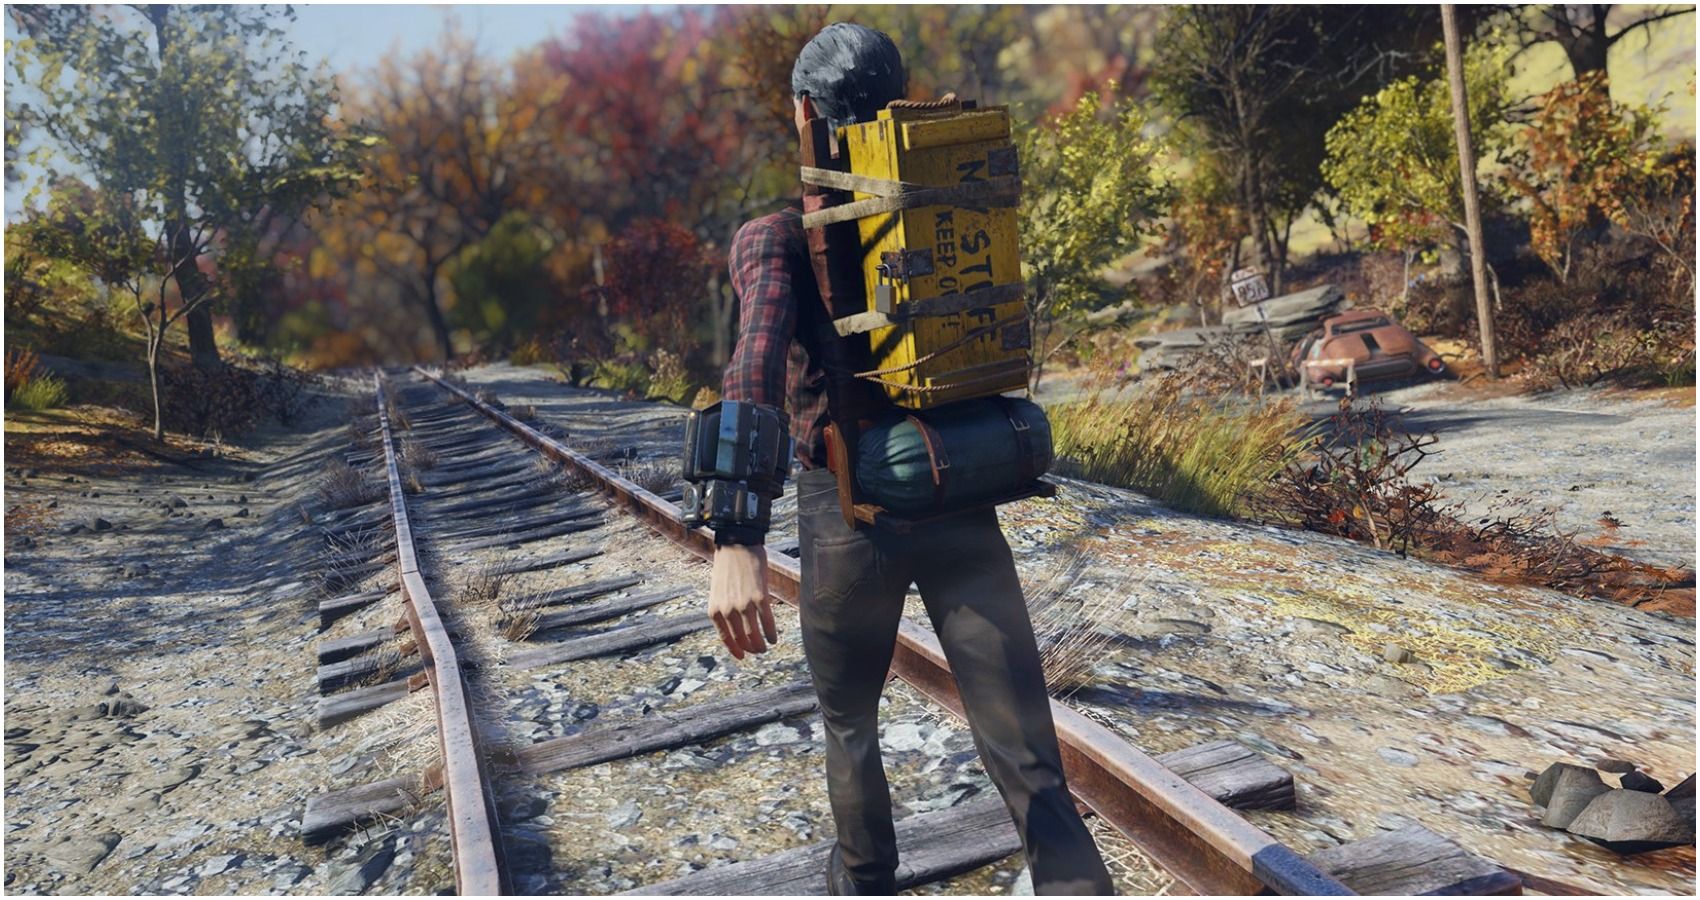 Fallout 76 Player Recruits Volunteers To Find Fabled Hidden Ending But Finds Only Disappointment